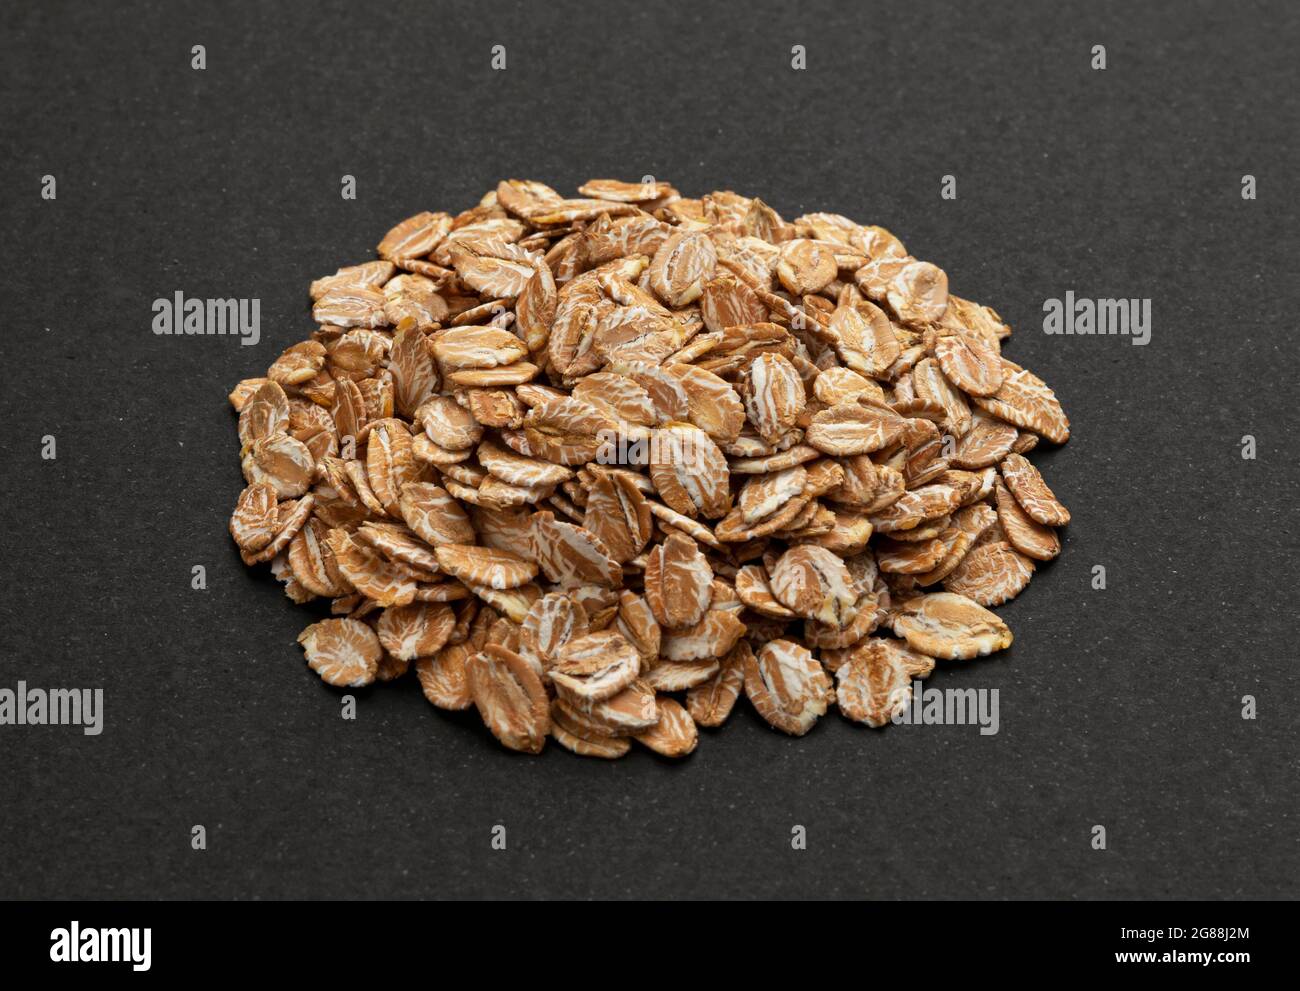 Top view of oat flakes on black background Stock Photo